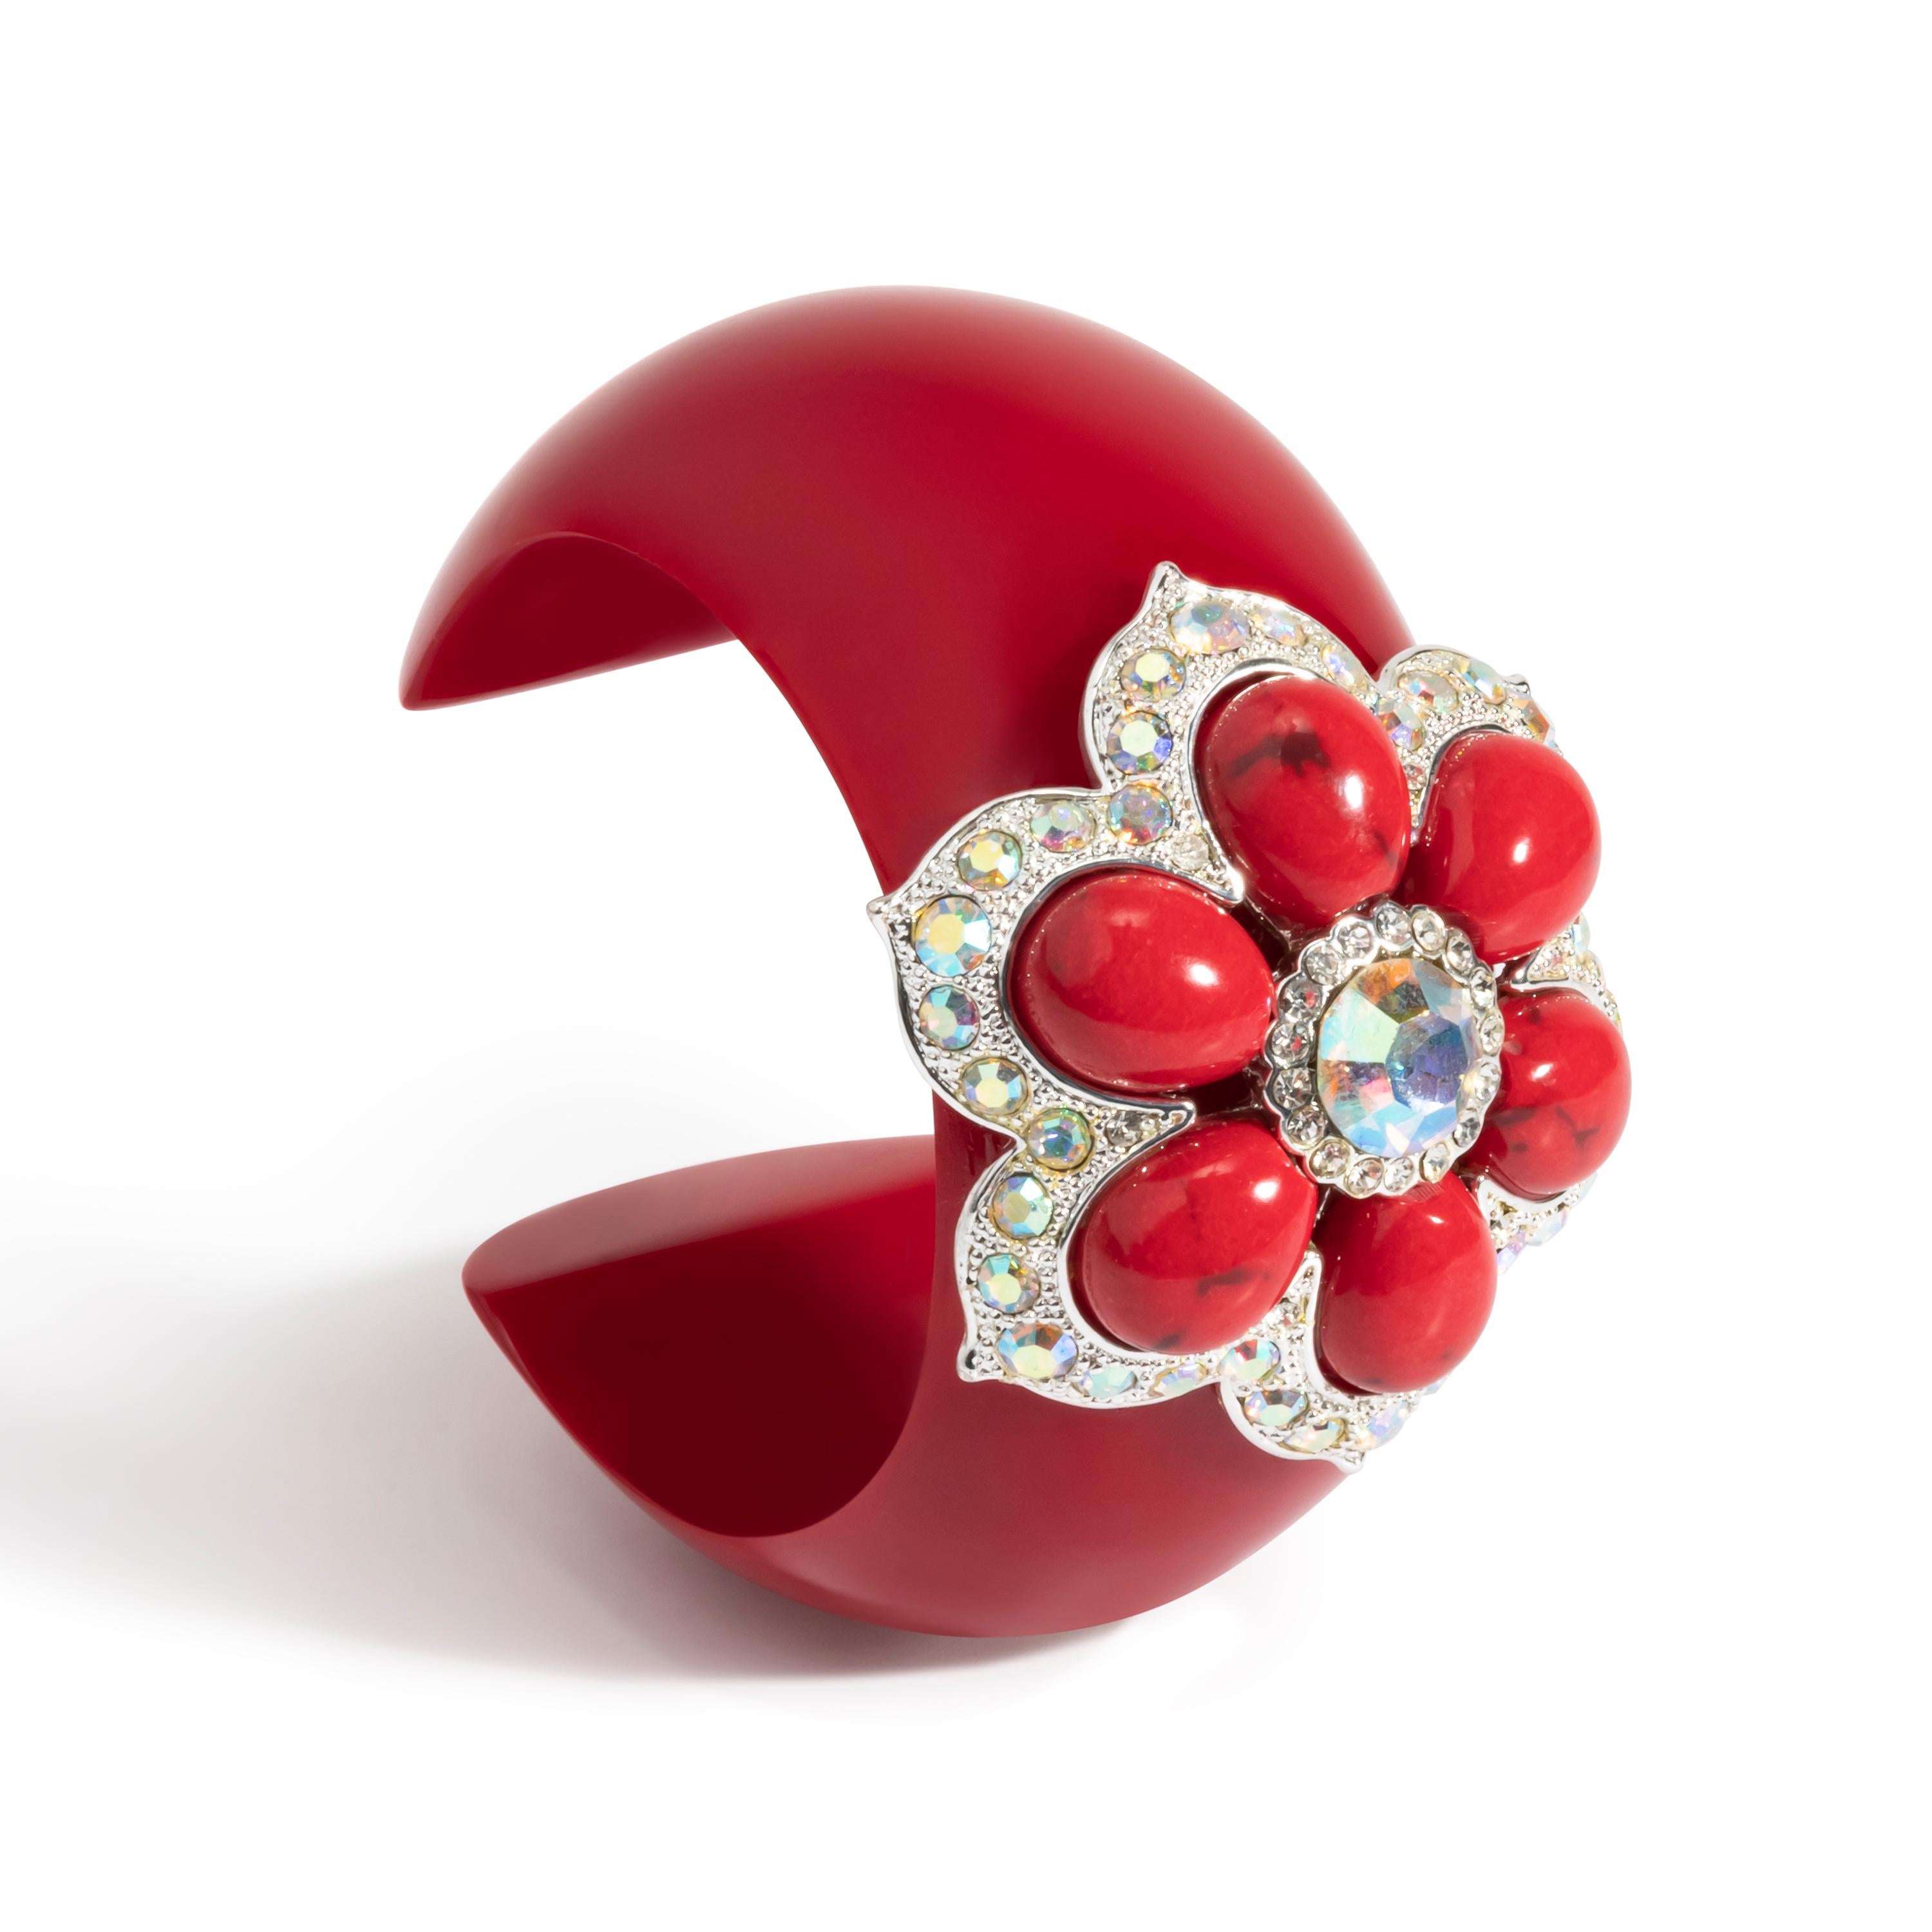 “Volver”Bochic red carpet bijoux jewlery, from the “IKON” private collection.  
A homage to Pedro Almadovar color motifs. The cuff features a parker rose.
The dangers red Rasin cuff is set with SWAROVSKI crystals, white plated with an incredible